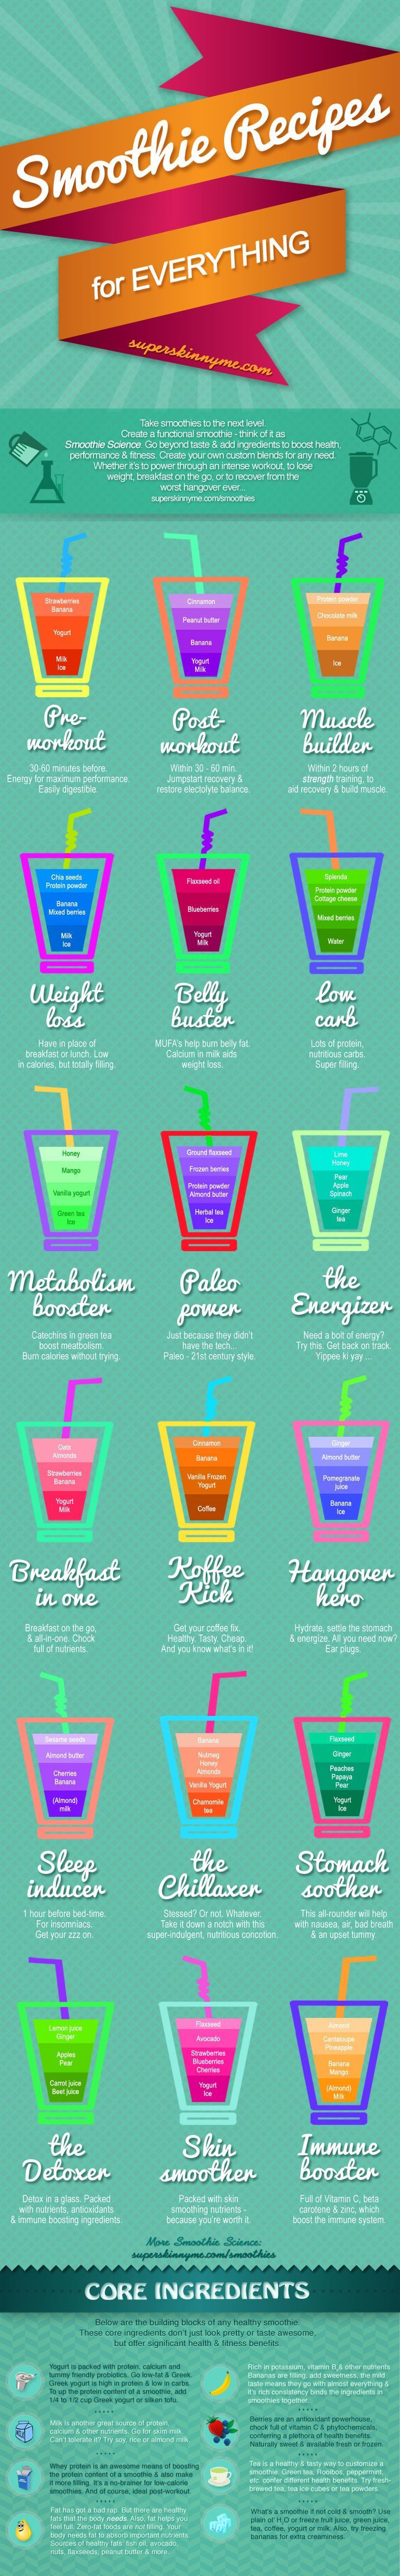 Smoothie Recipes For “Everything”